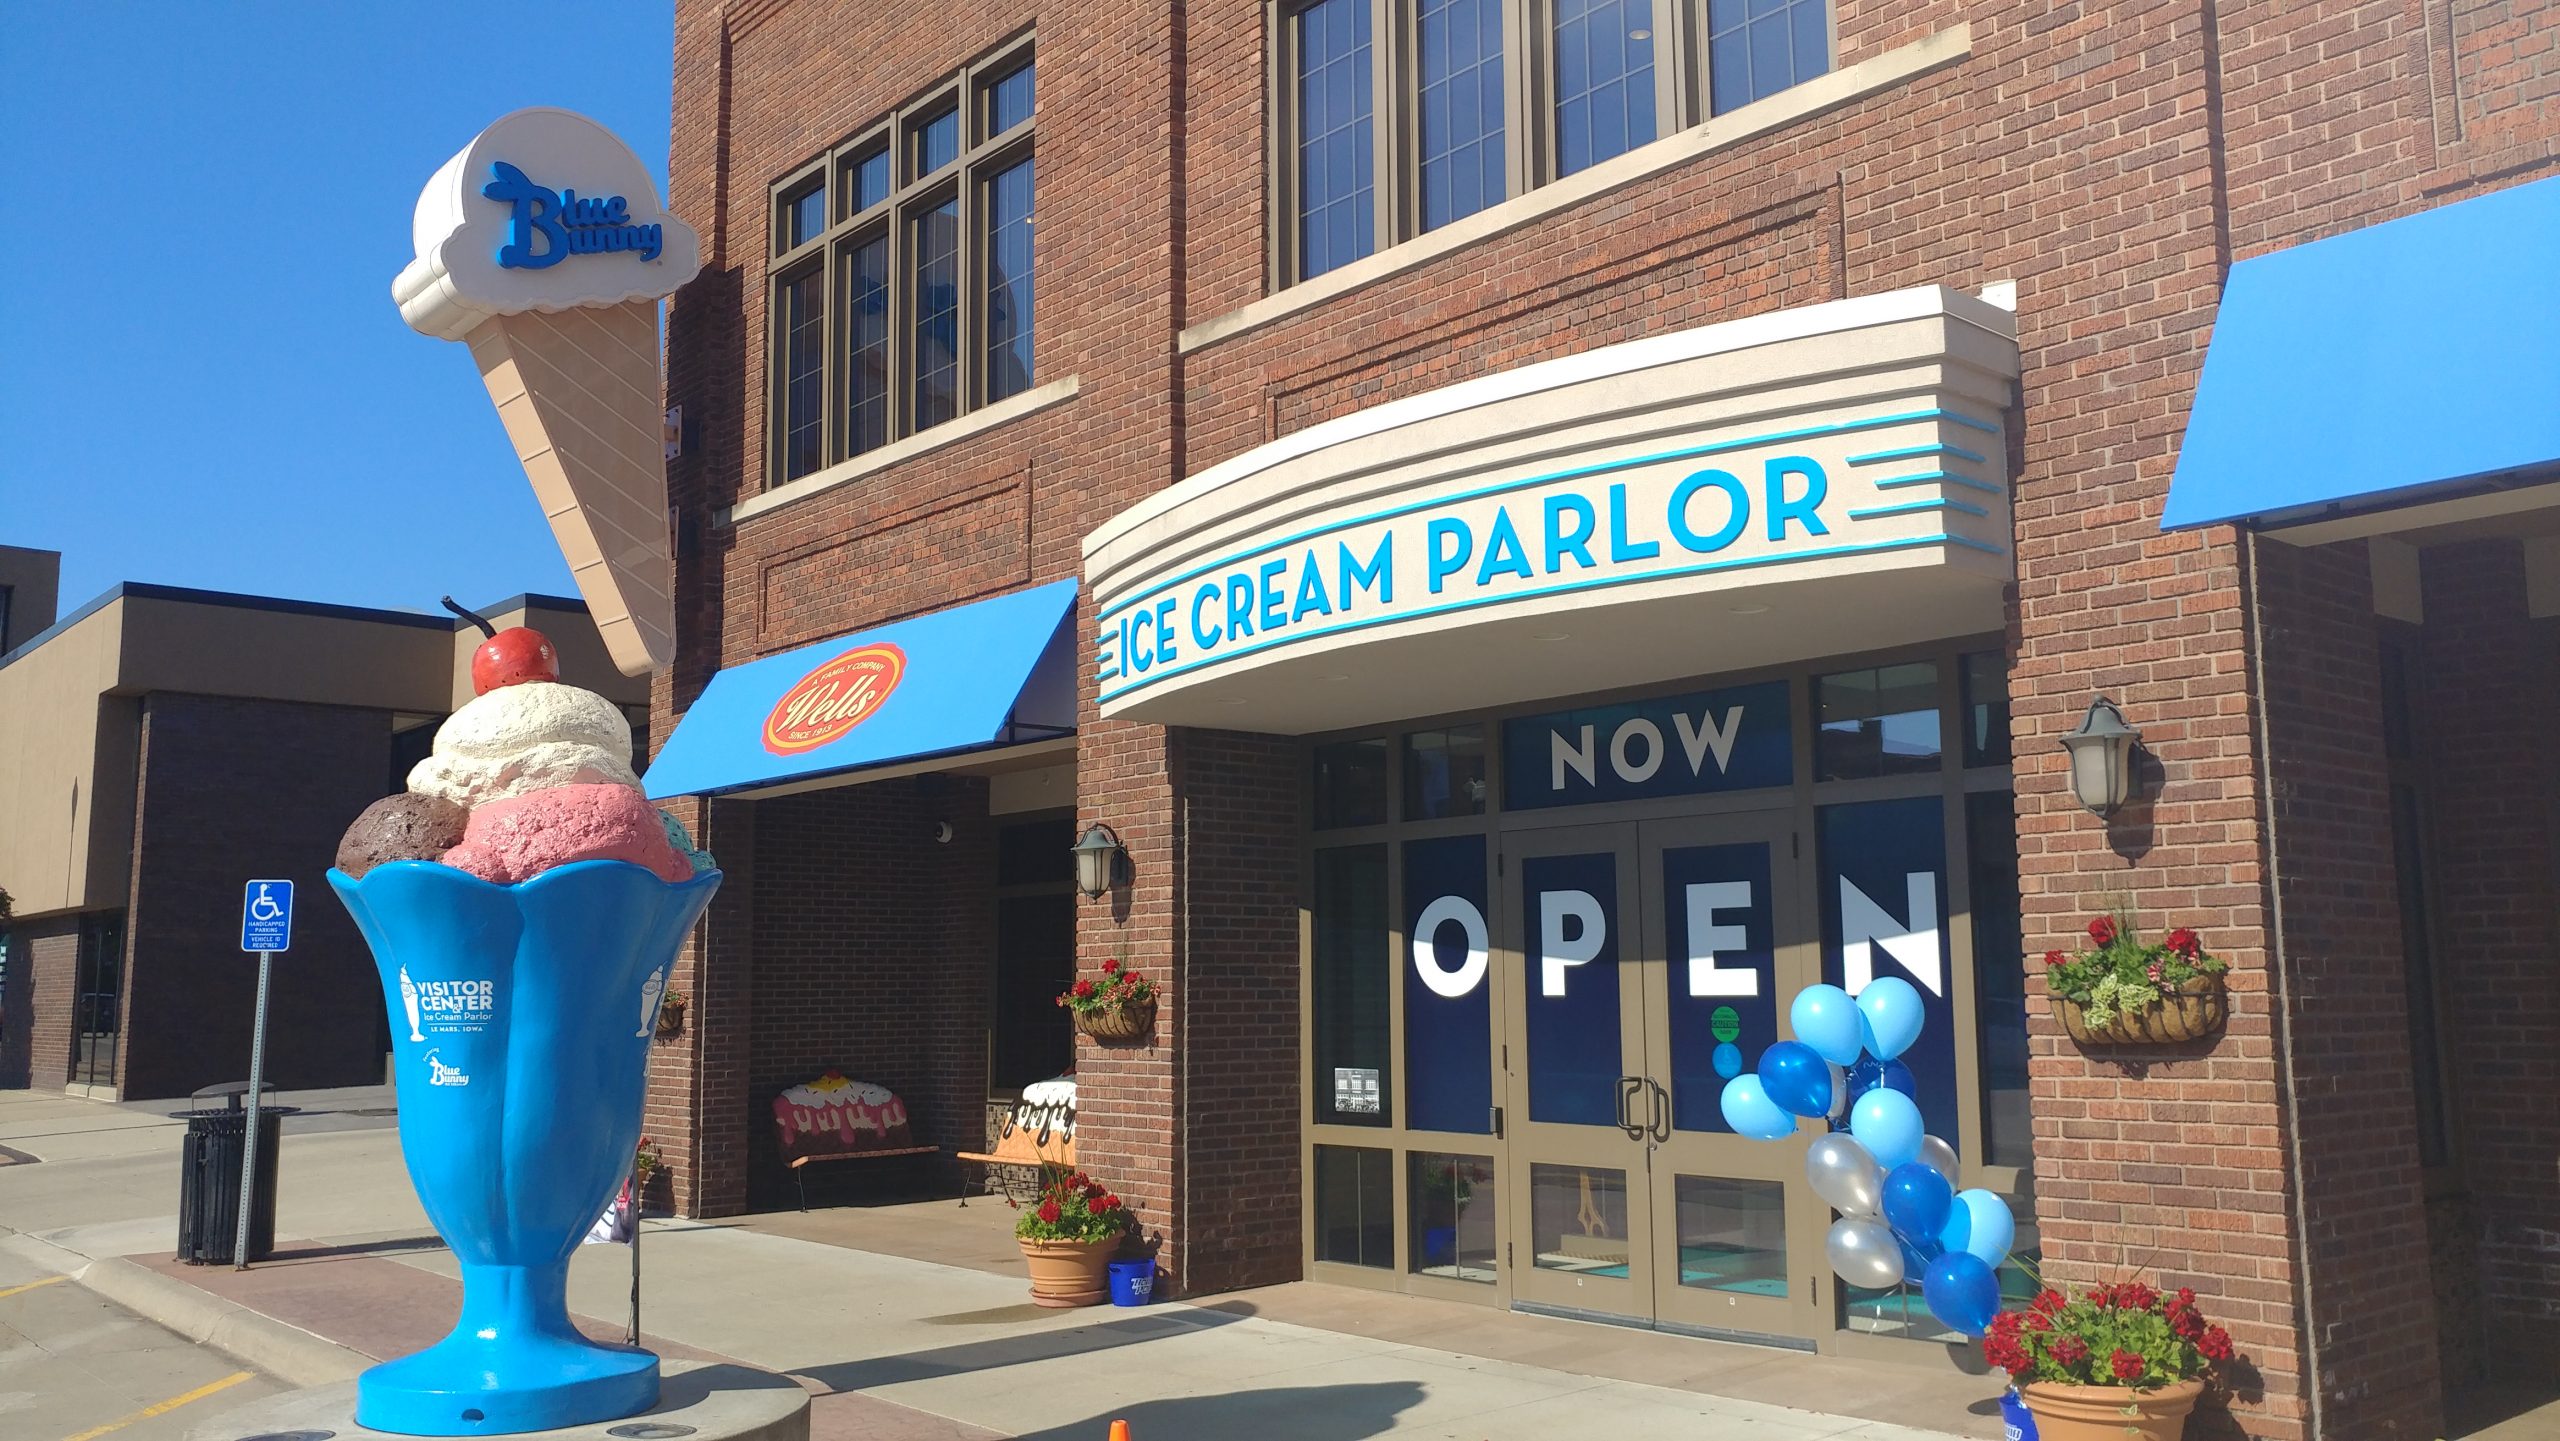 Entrance to the Blue Bunny visitor center with large signage saying "Ice Cream Parlor" and large sculptural display of an ice cream sundae.